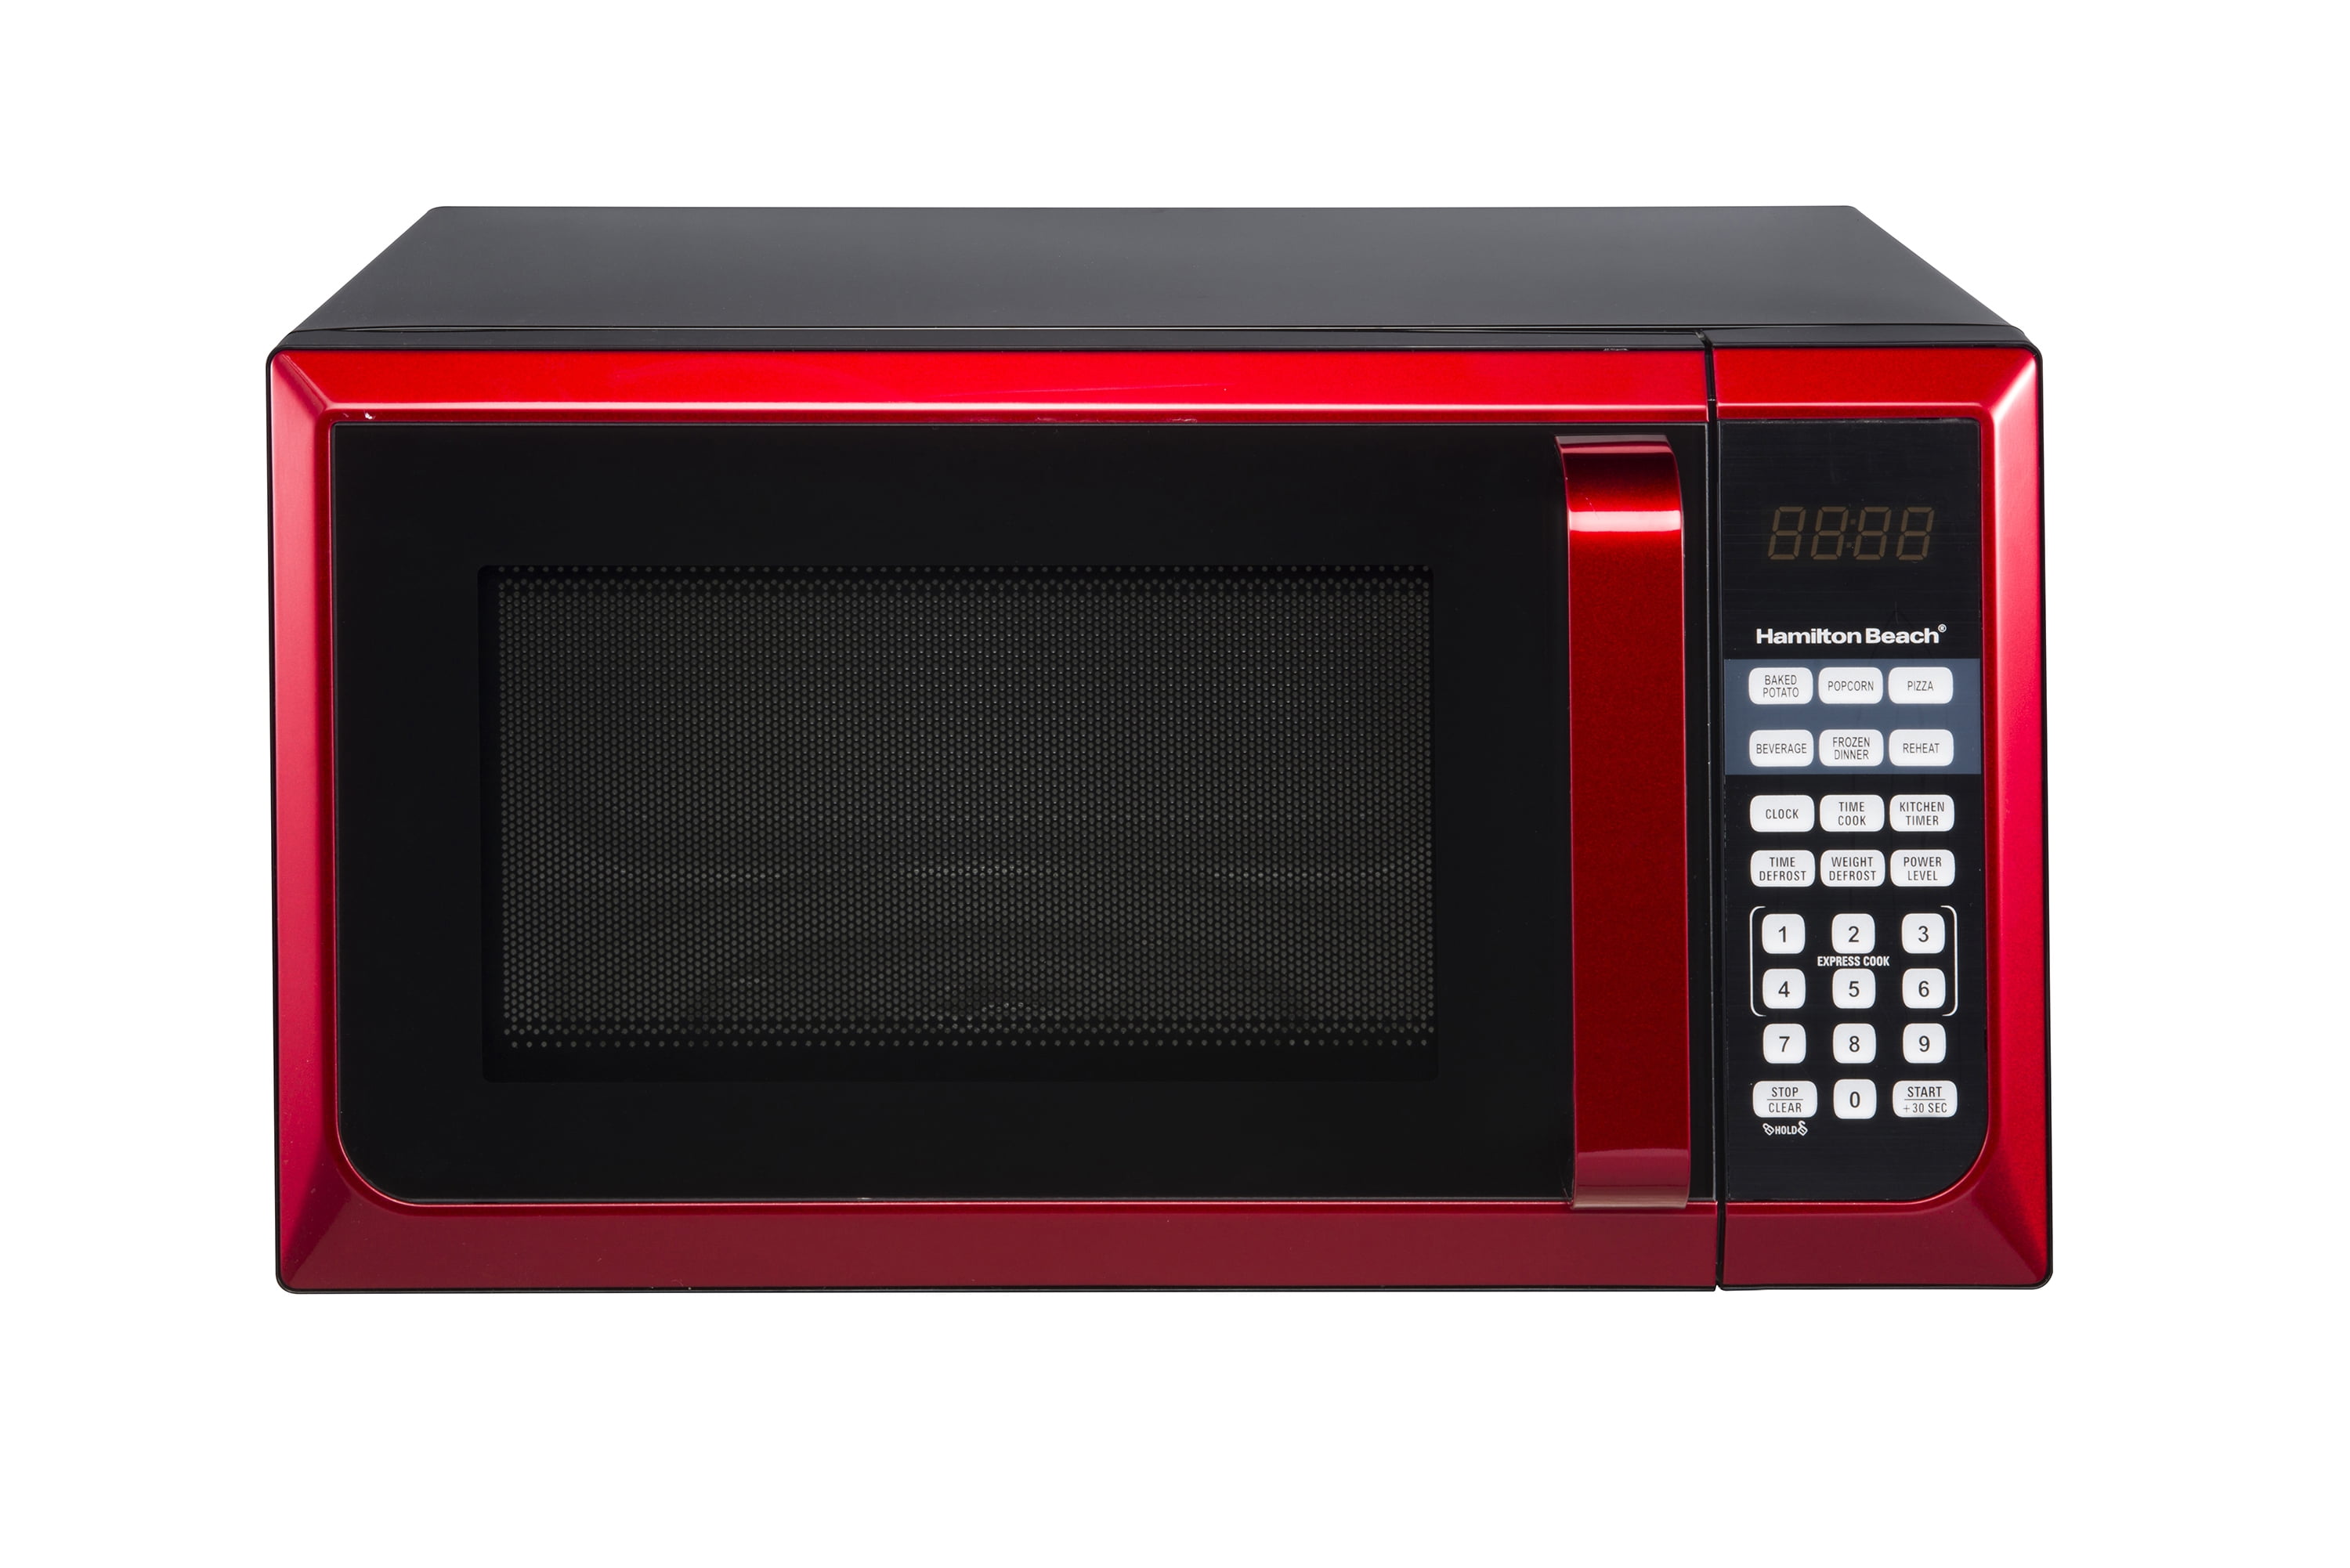  0.9 Cu. Ft. Stainless Steel Countertop Microwave Oven 19.02W x  15.6D x 11.06H 900W power/10 power levels : Home & Kitchen